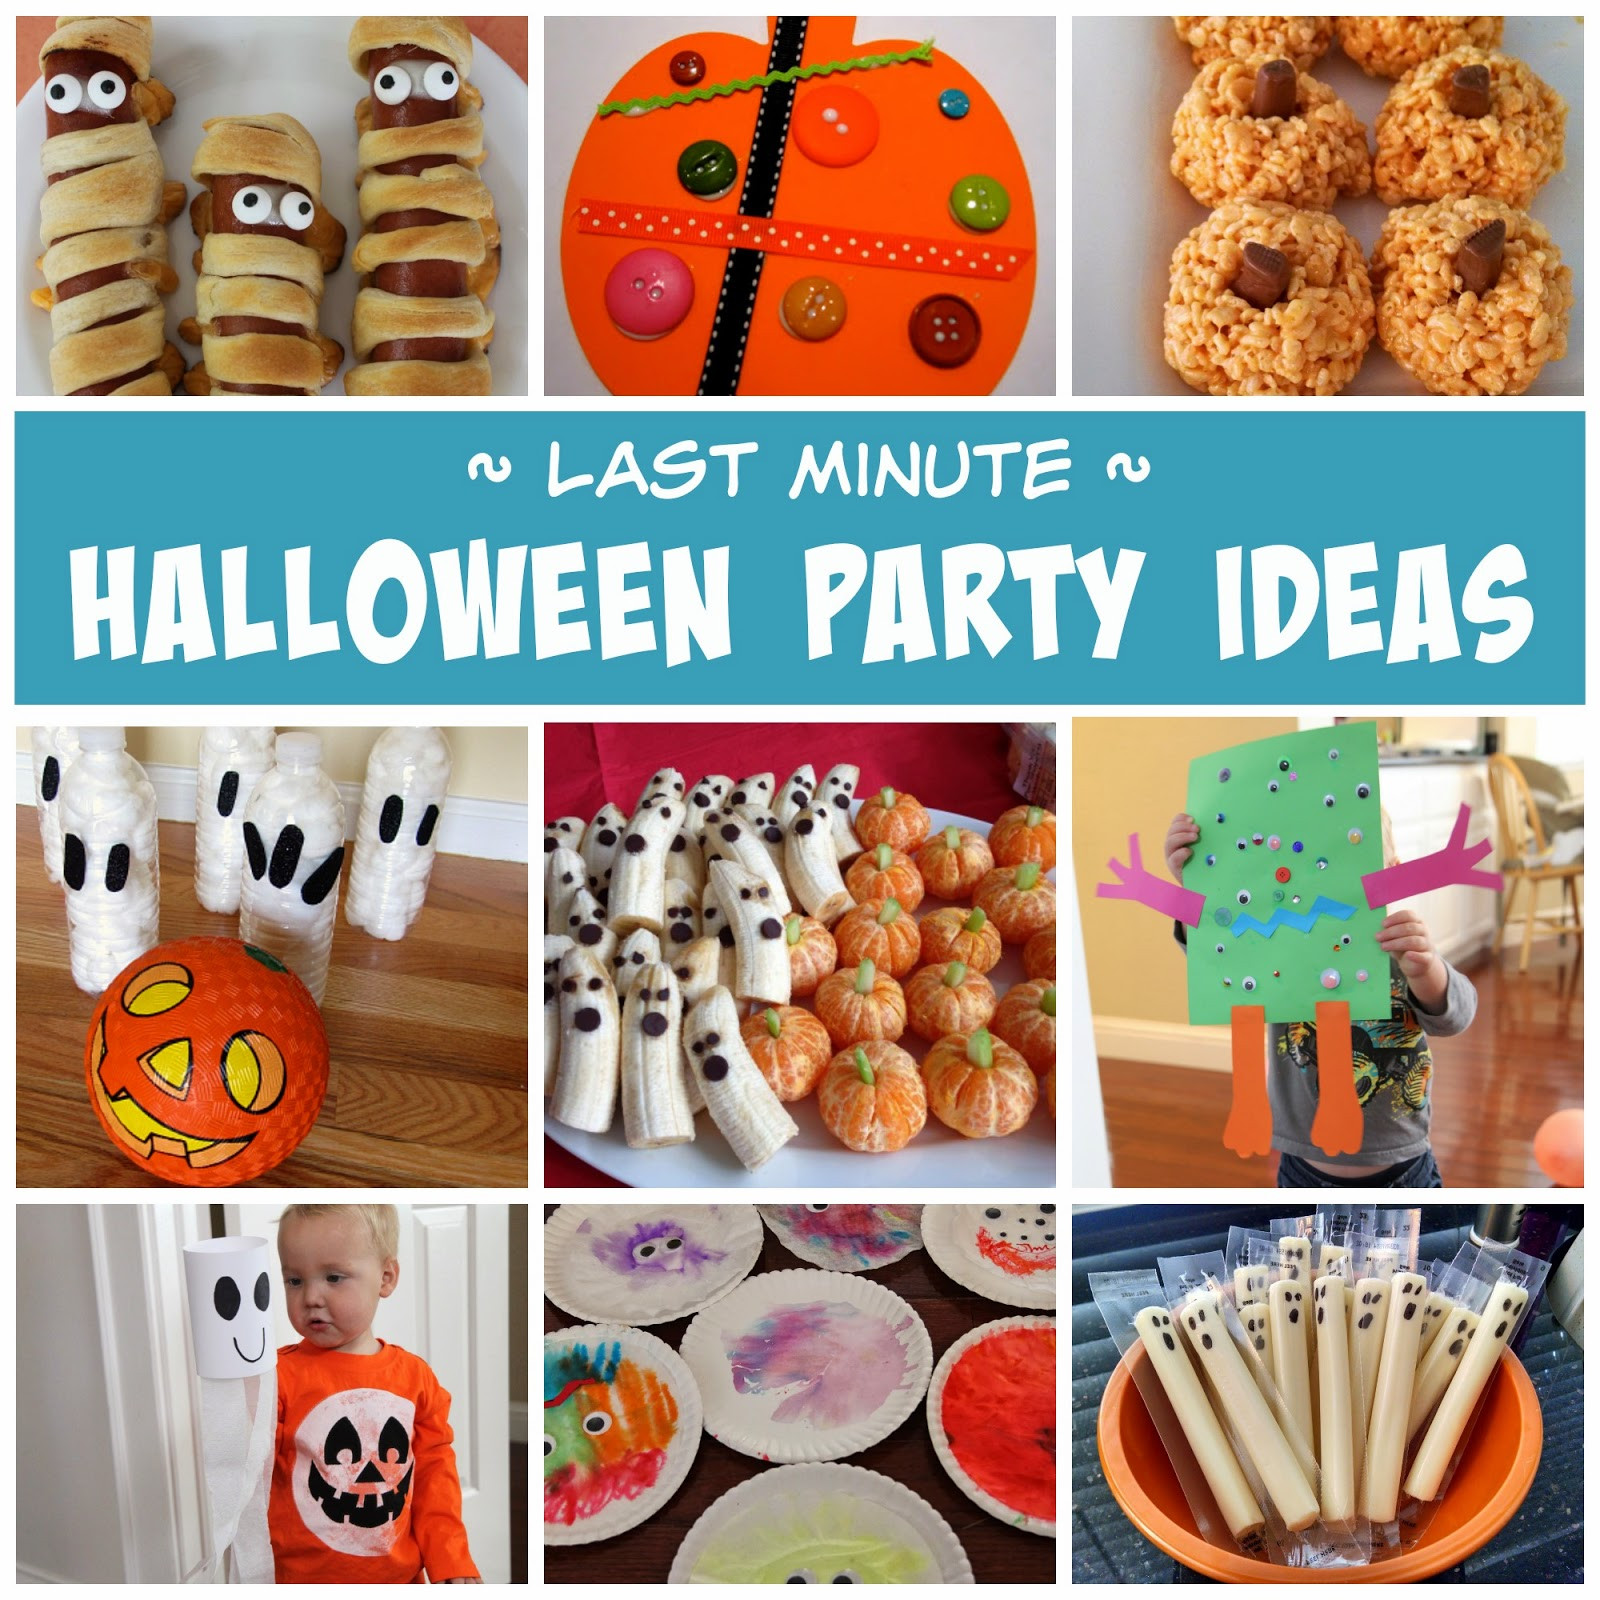 Last Minute Halloween Party Ideas
 Toddler Approved Last Minute Halloween Party Ideas